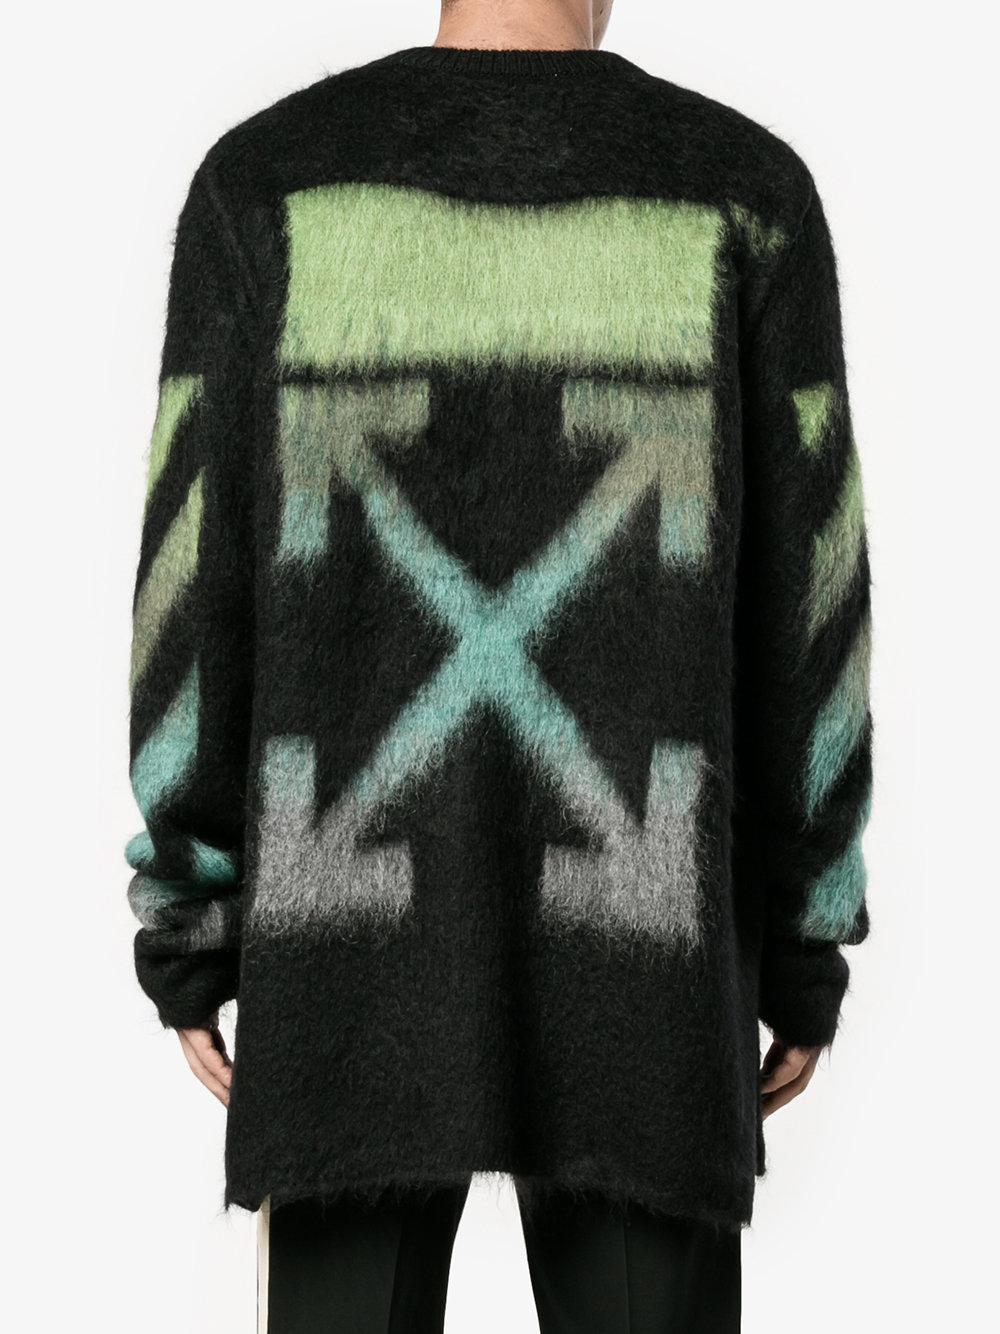 Off-White c/o Virgil Abloh Wool Brushed Arrows Sweater in Black 